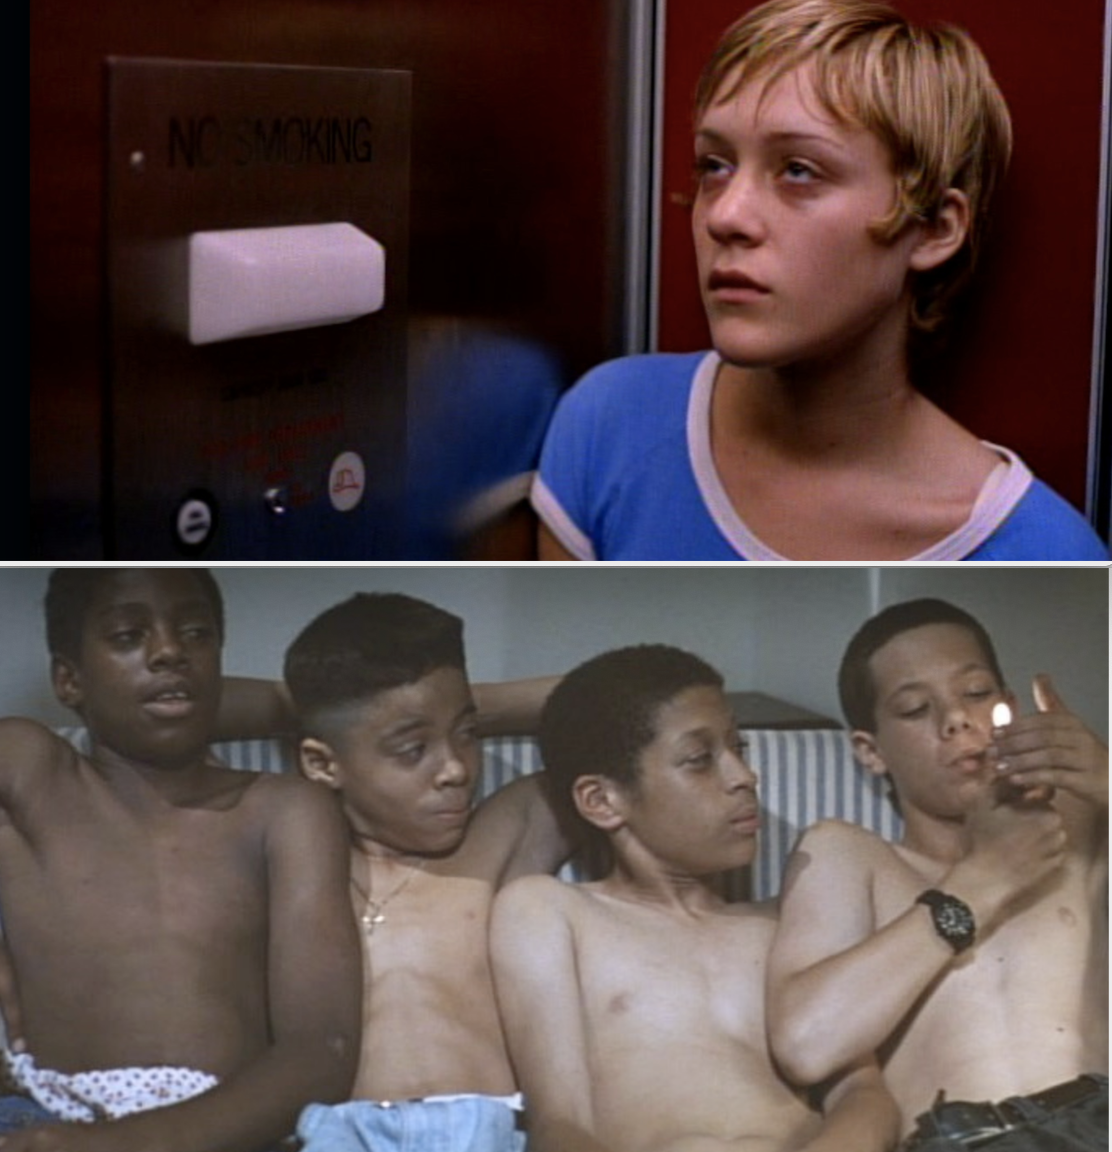 A bunch of kids sitting together on a couch, smoking, in the movie &quot;Kids&quot;